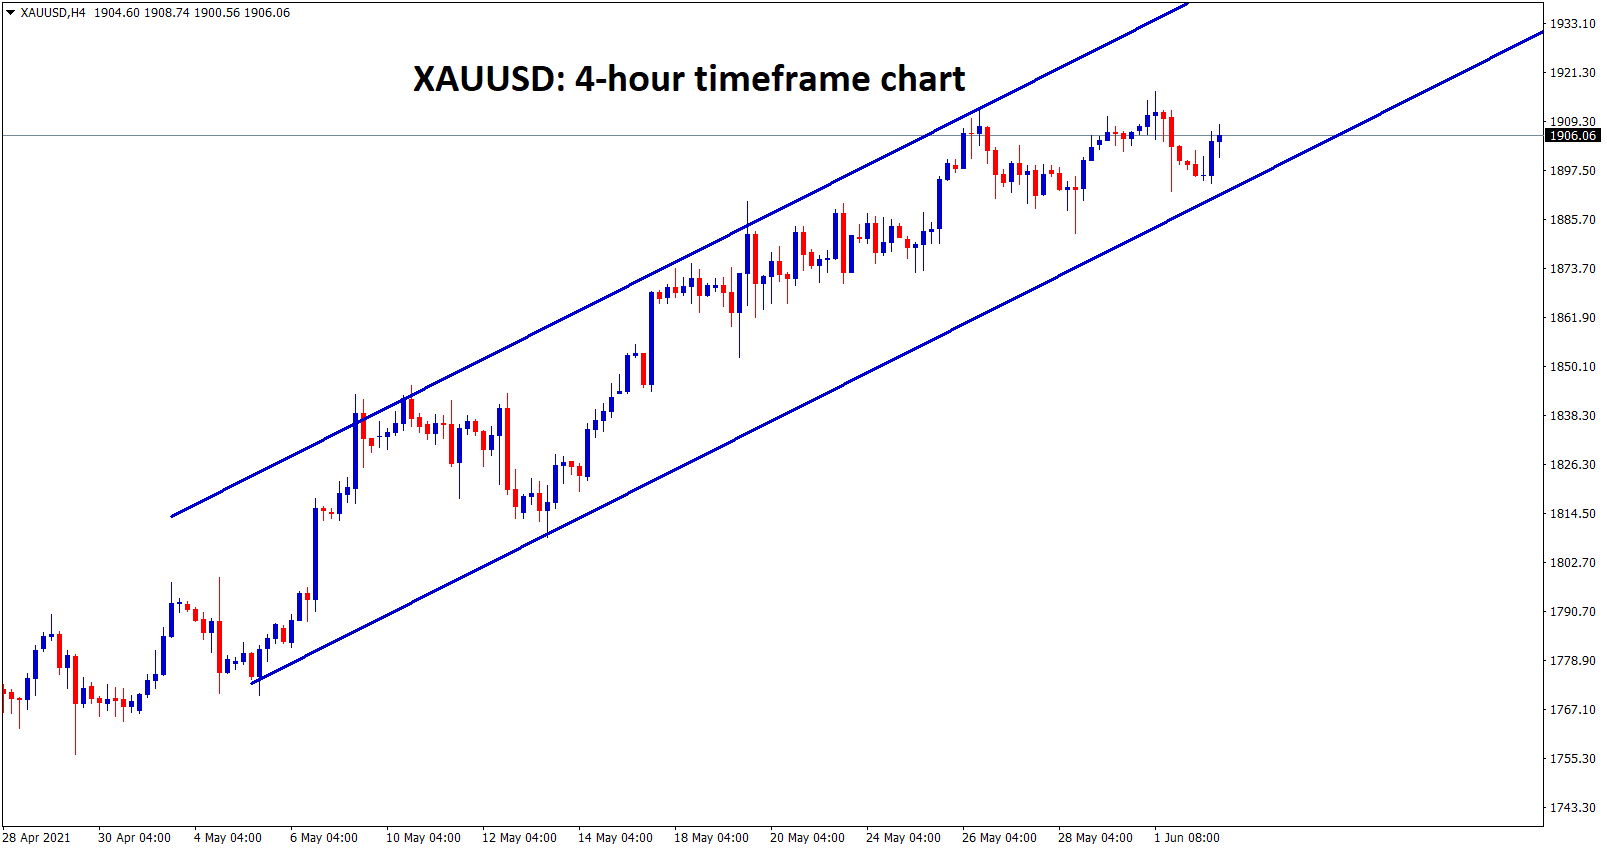 Gold is still moving in an uptrend range channel wait for breakout from this channel